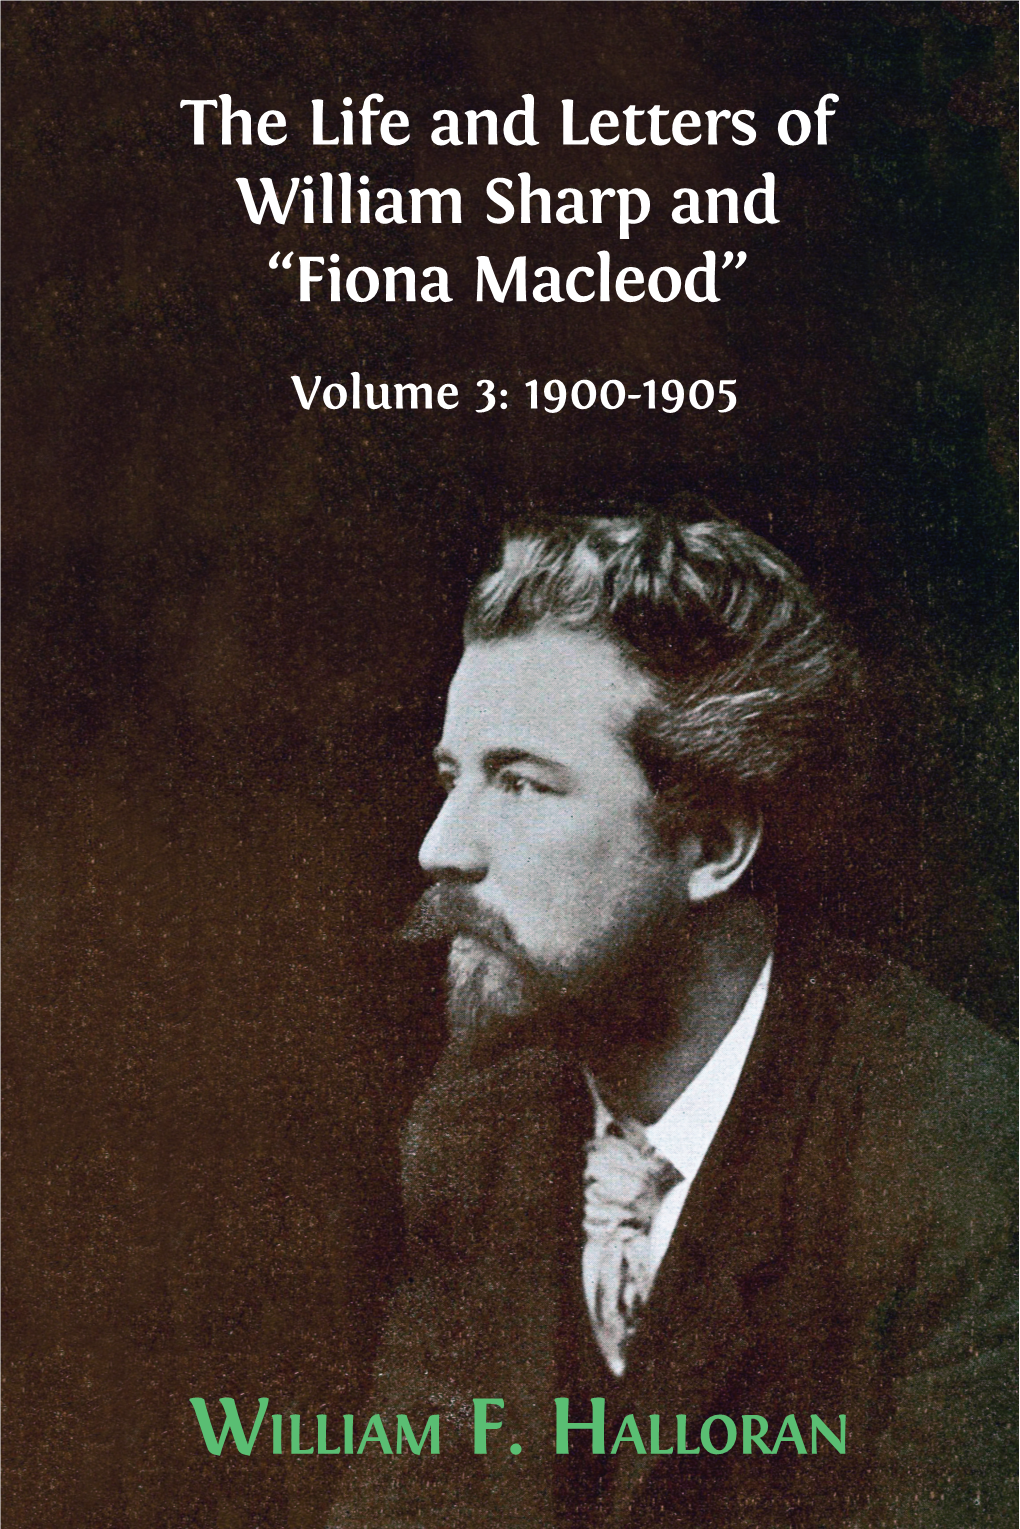 The Life and Letters of William Sharp and “Fiona Macleod”